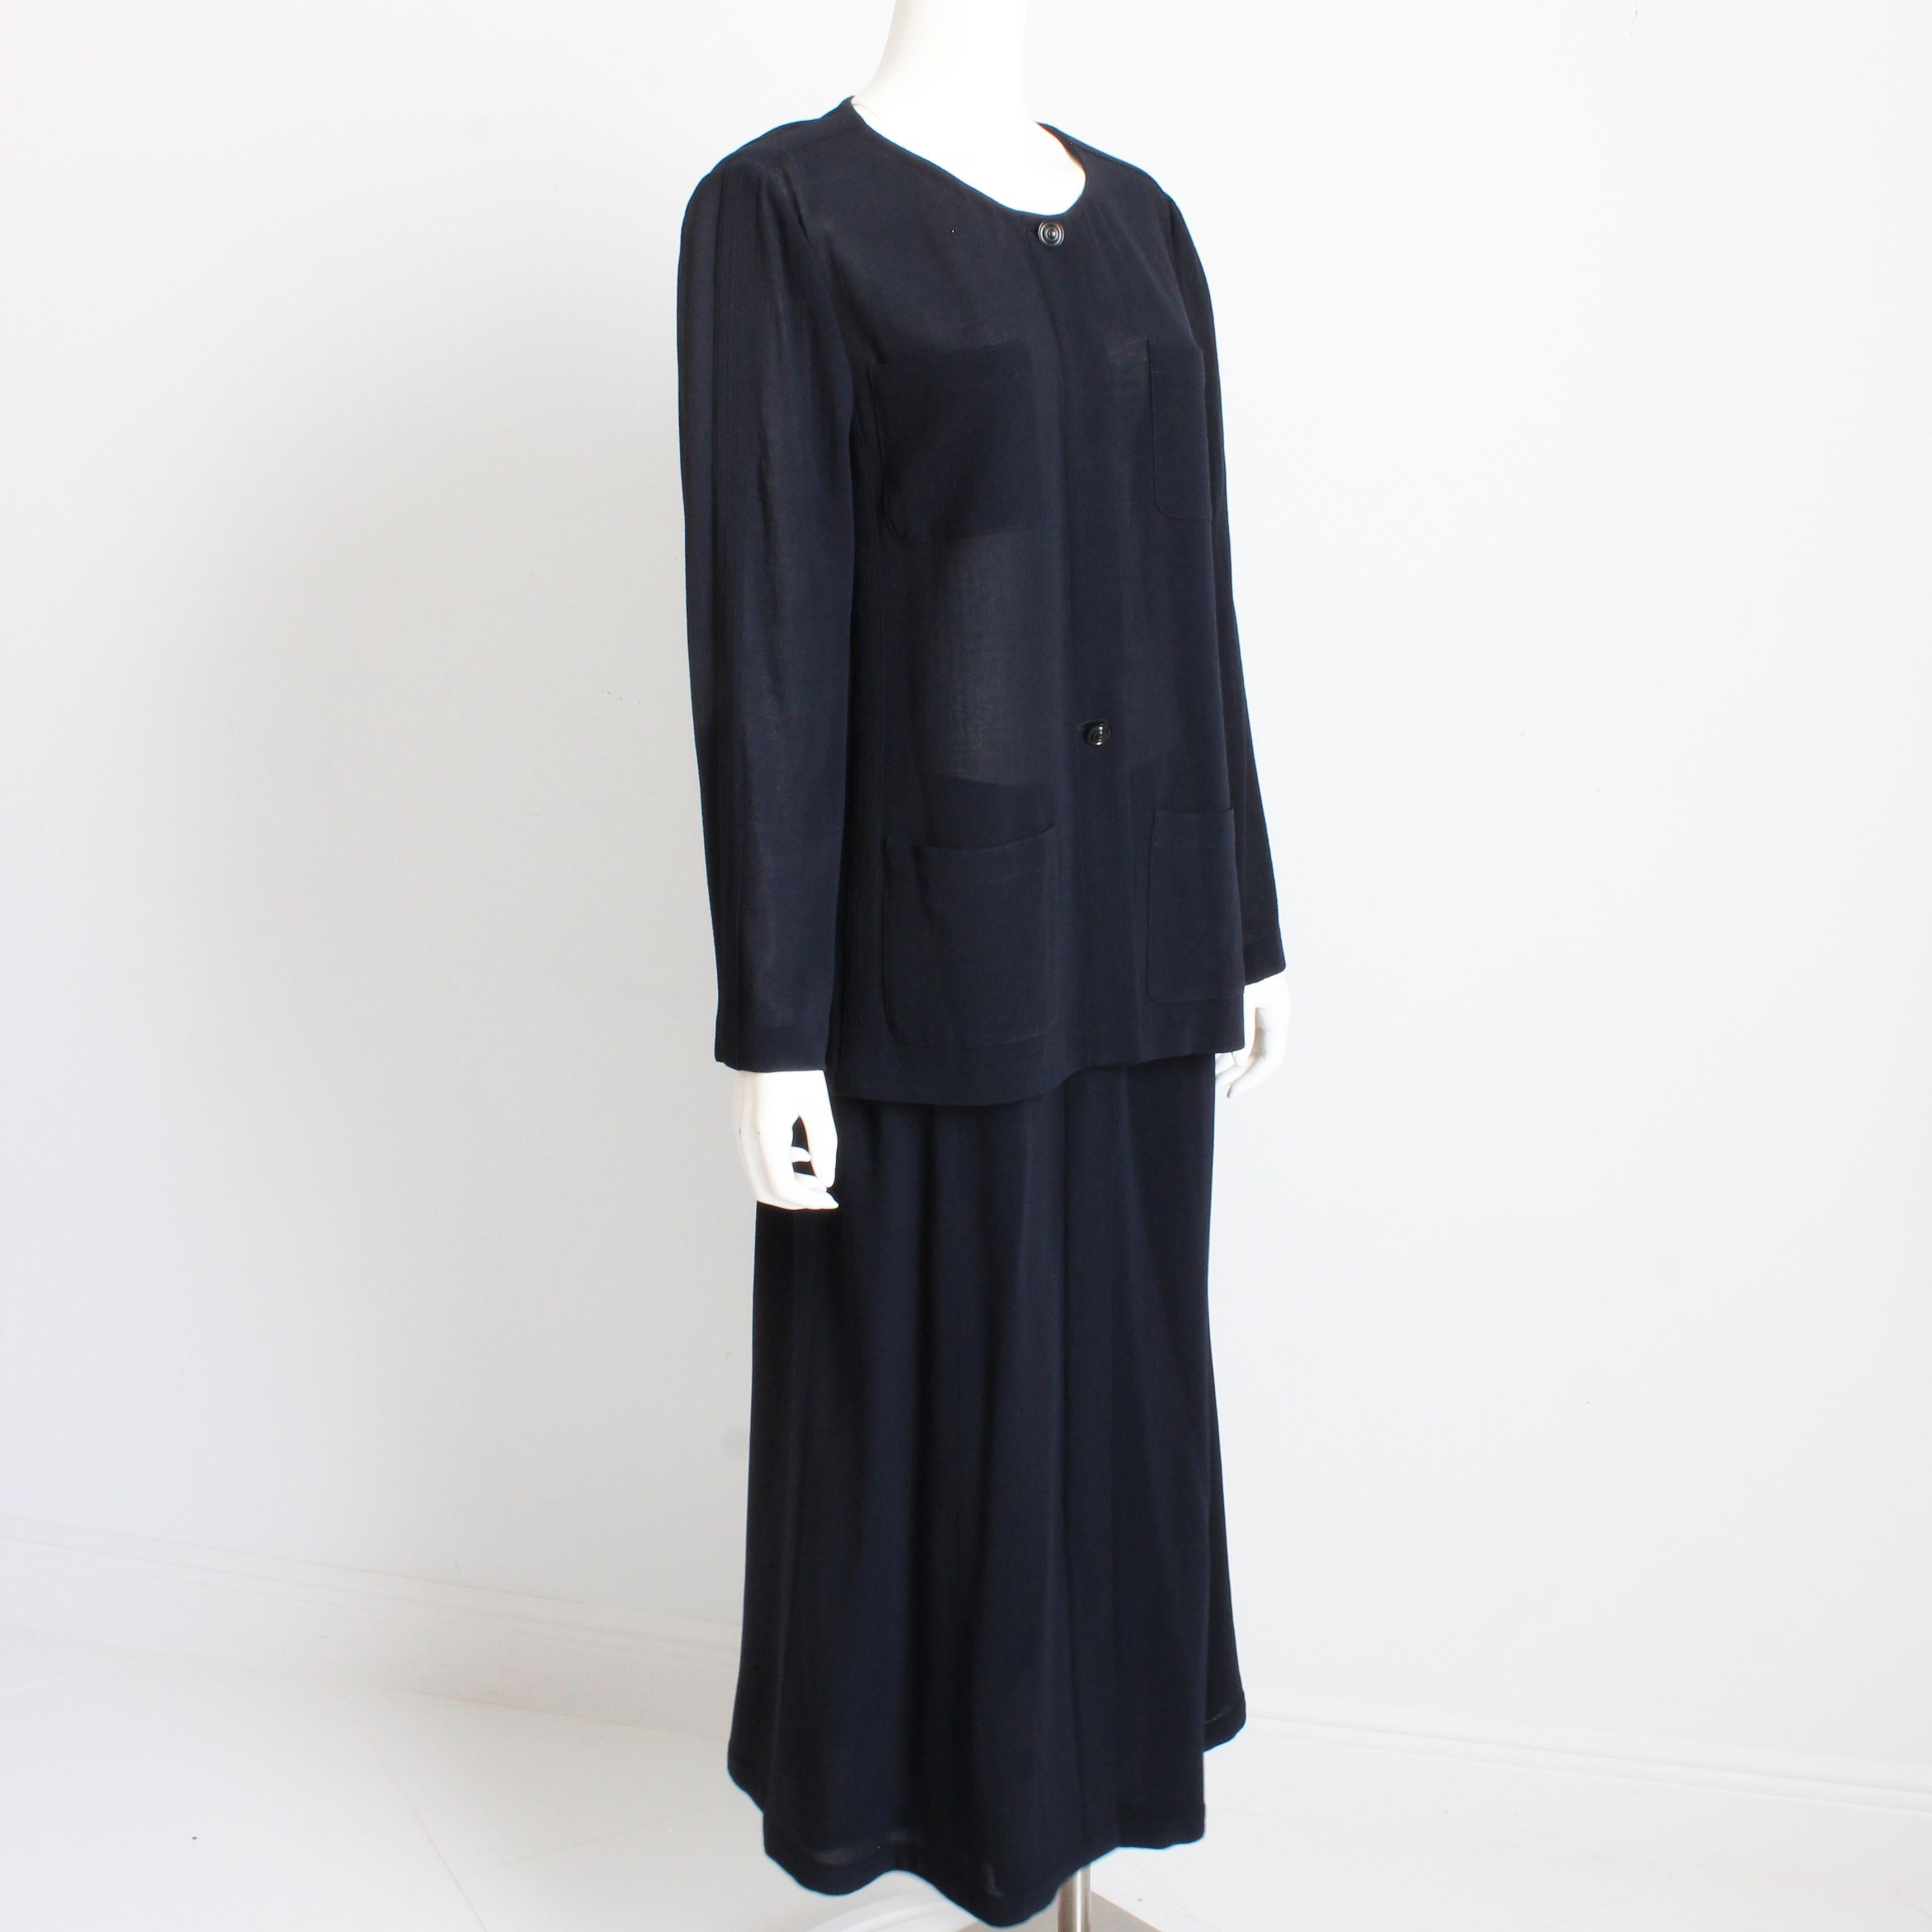 Preowned, vintage Chanel jacket and skirt suit from the 99P collection.  Made from an incredibly light and sheer navy wool crepe, the jacket features a collar button with CCs, and several hidden buttons, front pockets and a delicate silver chain